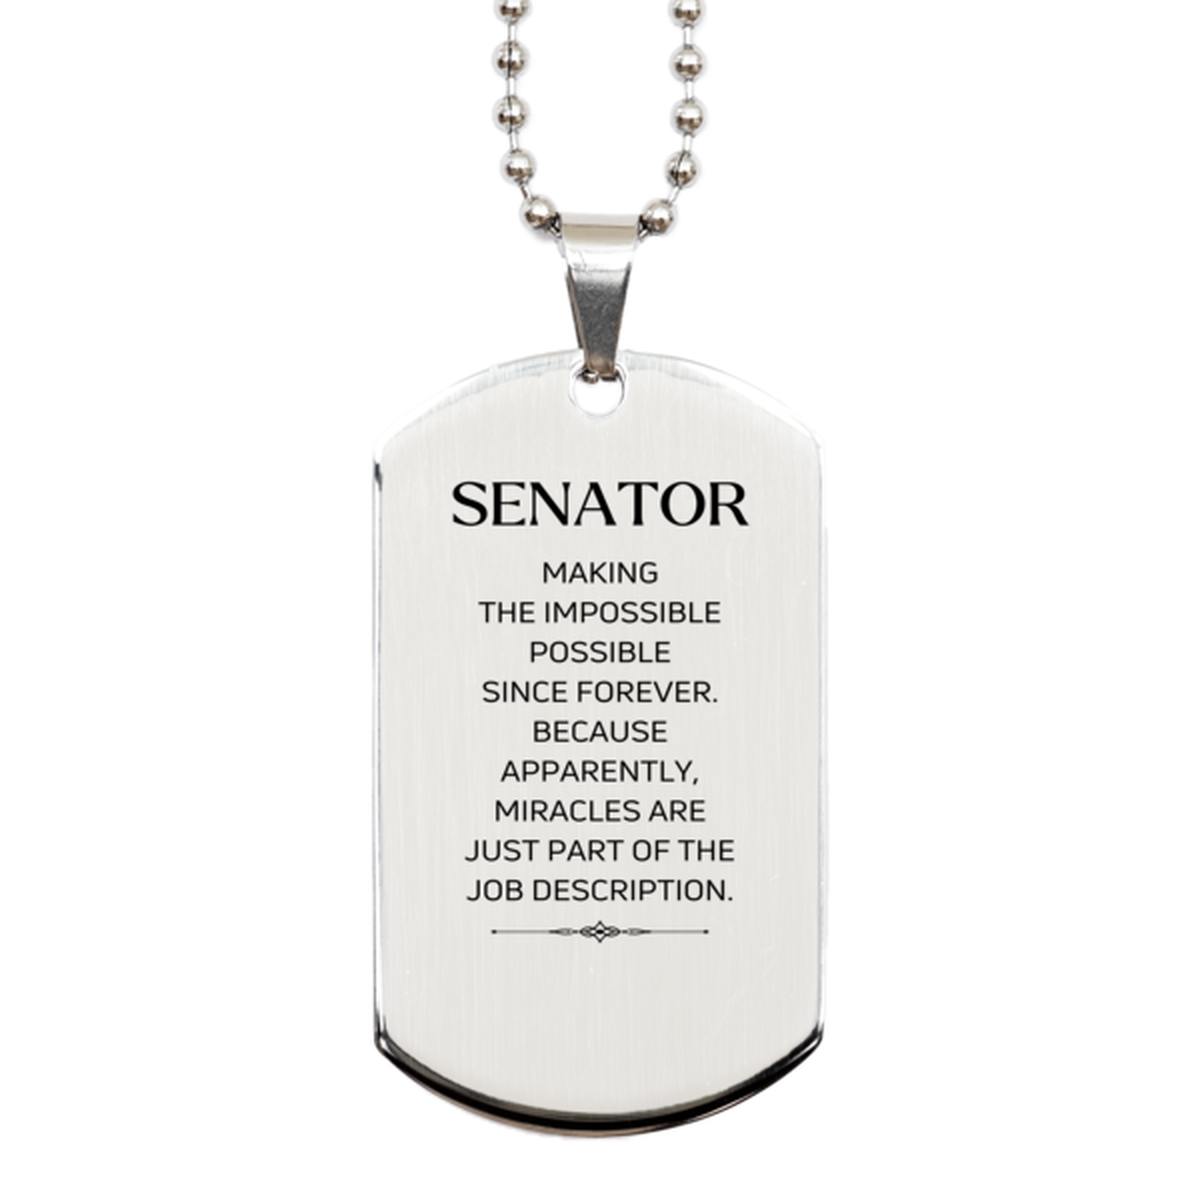 Funny Senator Gifts, Miracles are just part of the job description, Inspirational Birthday Silver Dog Tag For Senator, Men, Women, Coworkers, Friends, Boss